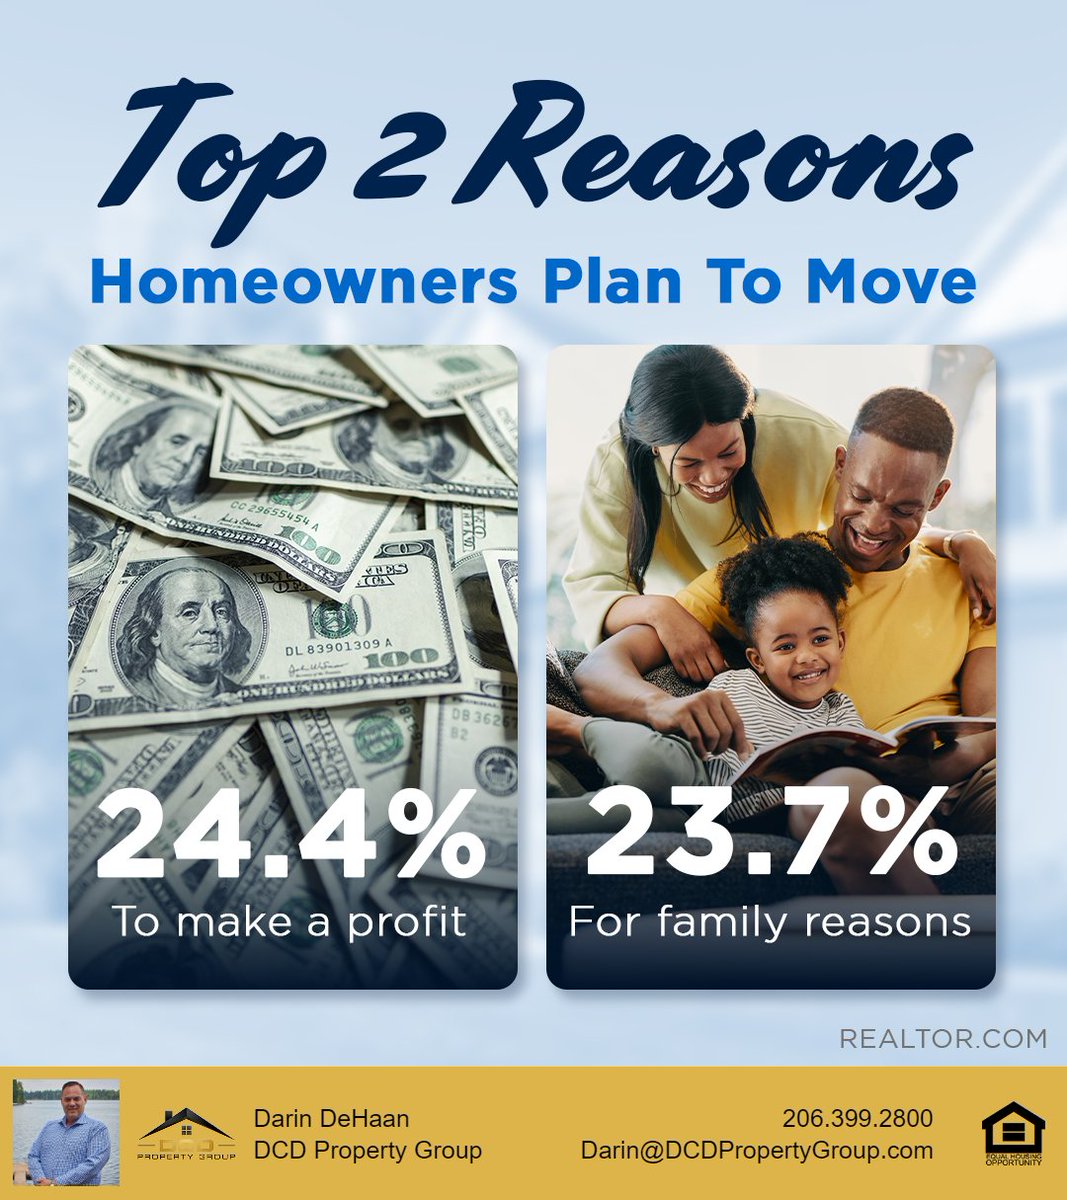 #realestate #homeownership #dcdpropertygroup #sellyourhouse #sellyourhome #sellersagent #sellermarket